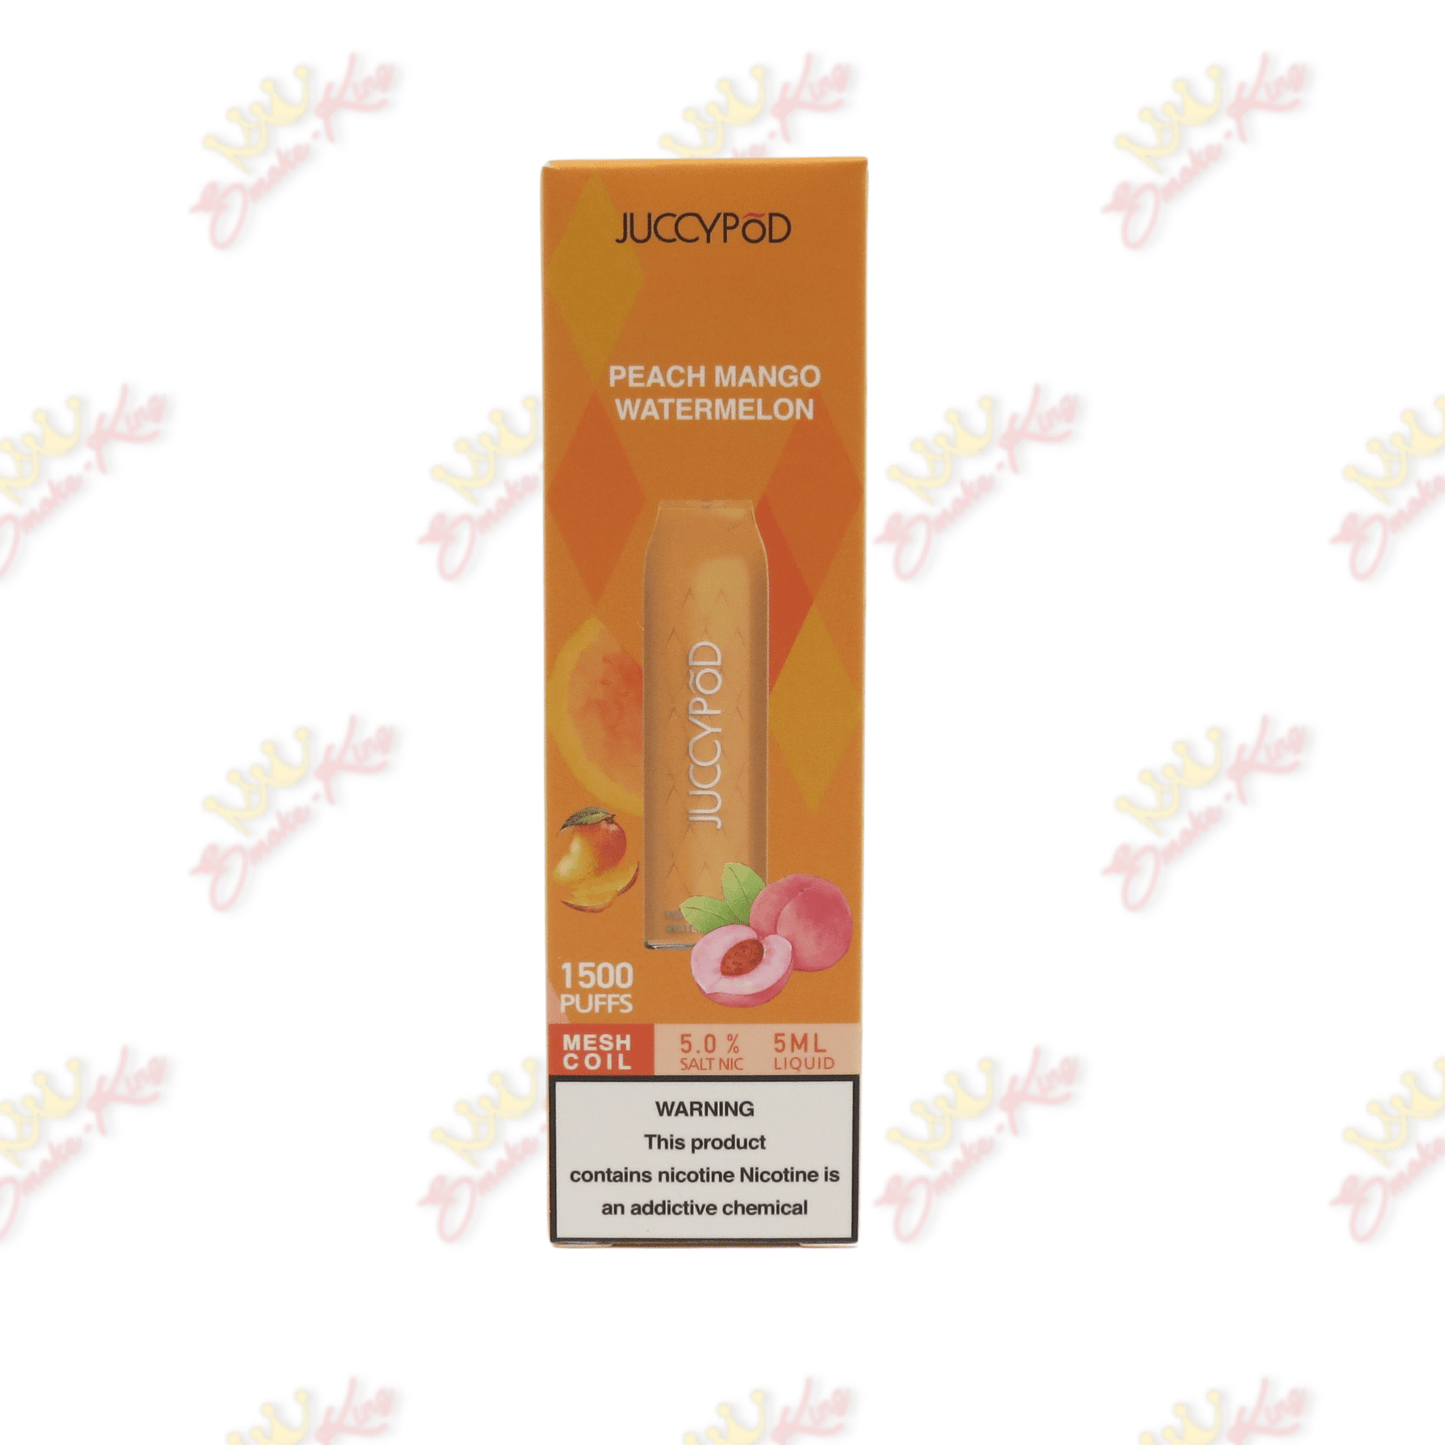 Juicy Pods Disposable Vapes Peach Mango Watermelon / One for $11.99 Juicy Pod (1500 puffs)